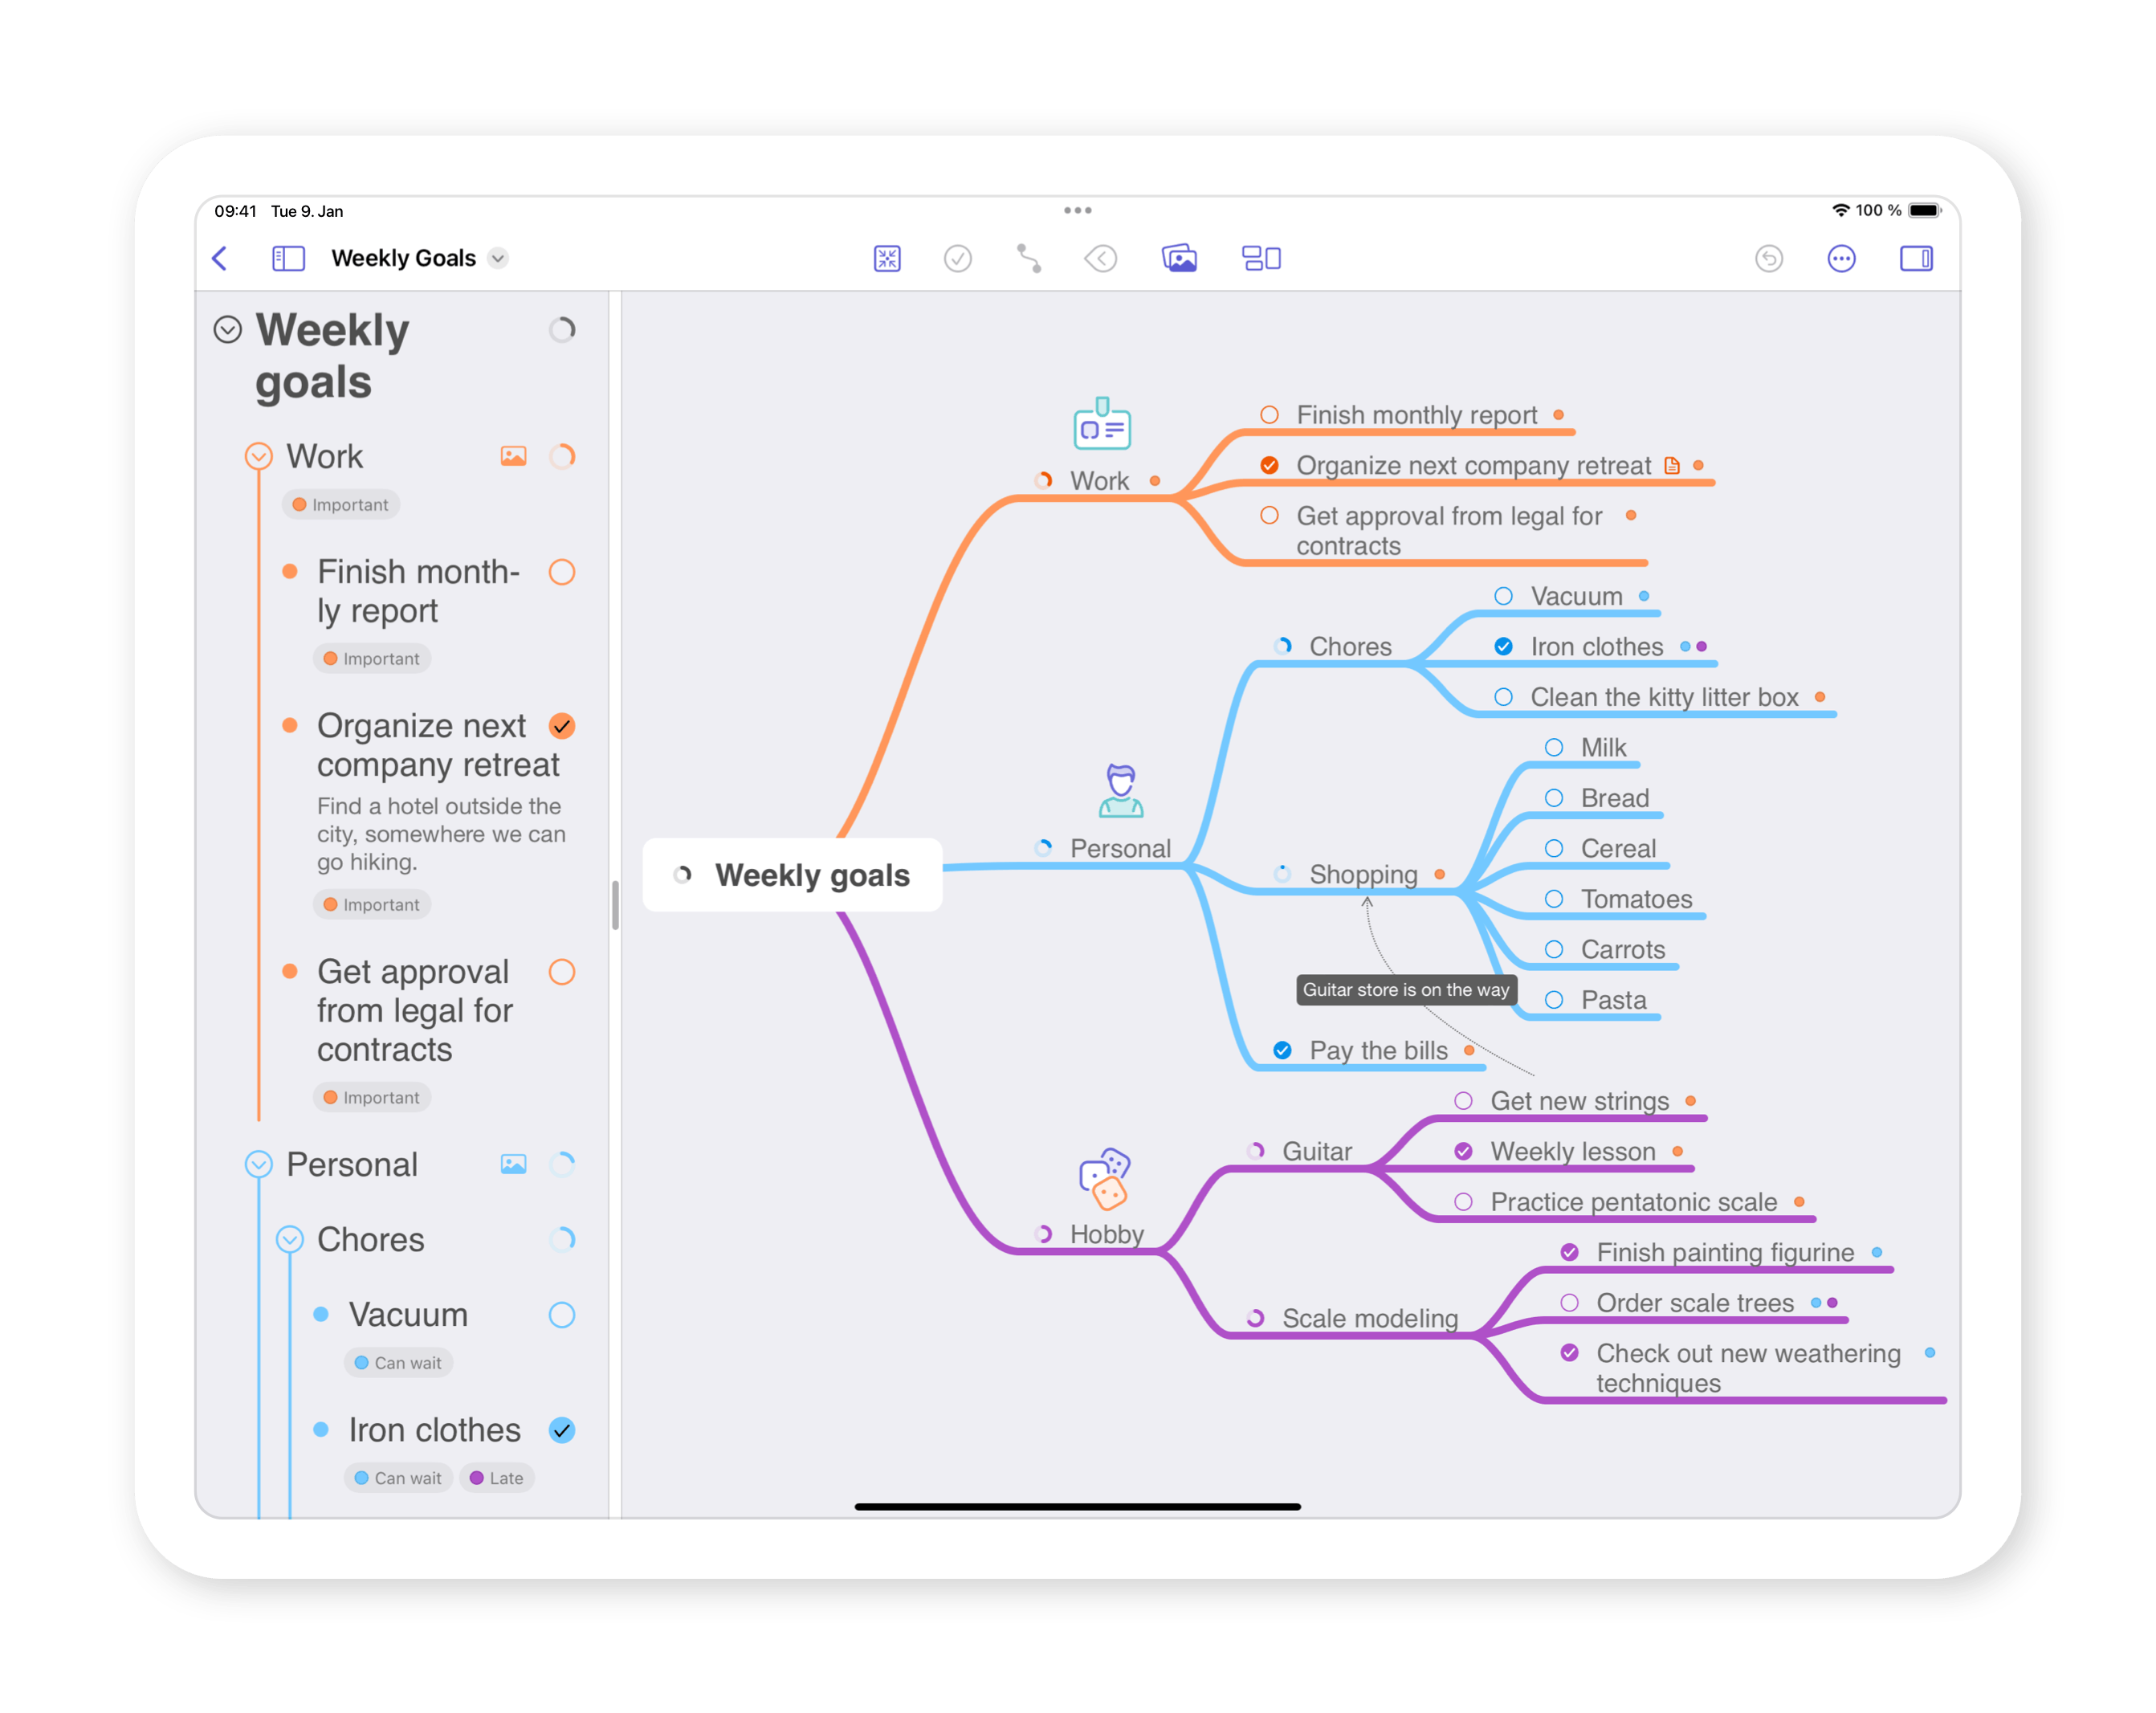 Tablet shows a MindNode Weekly Goals outline and mind map with color coded categories branching off into subcategories and tasks. The sidebar outline provides an option to check off completed tasks which then adds a check mark to the mind map. 